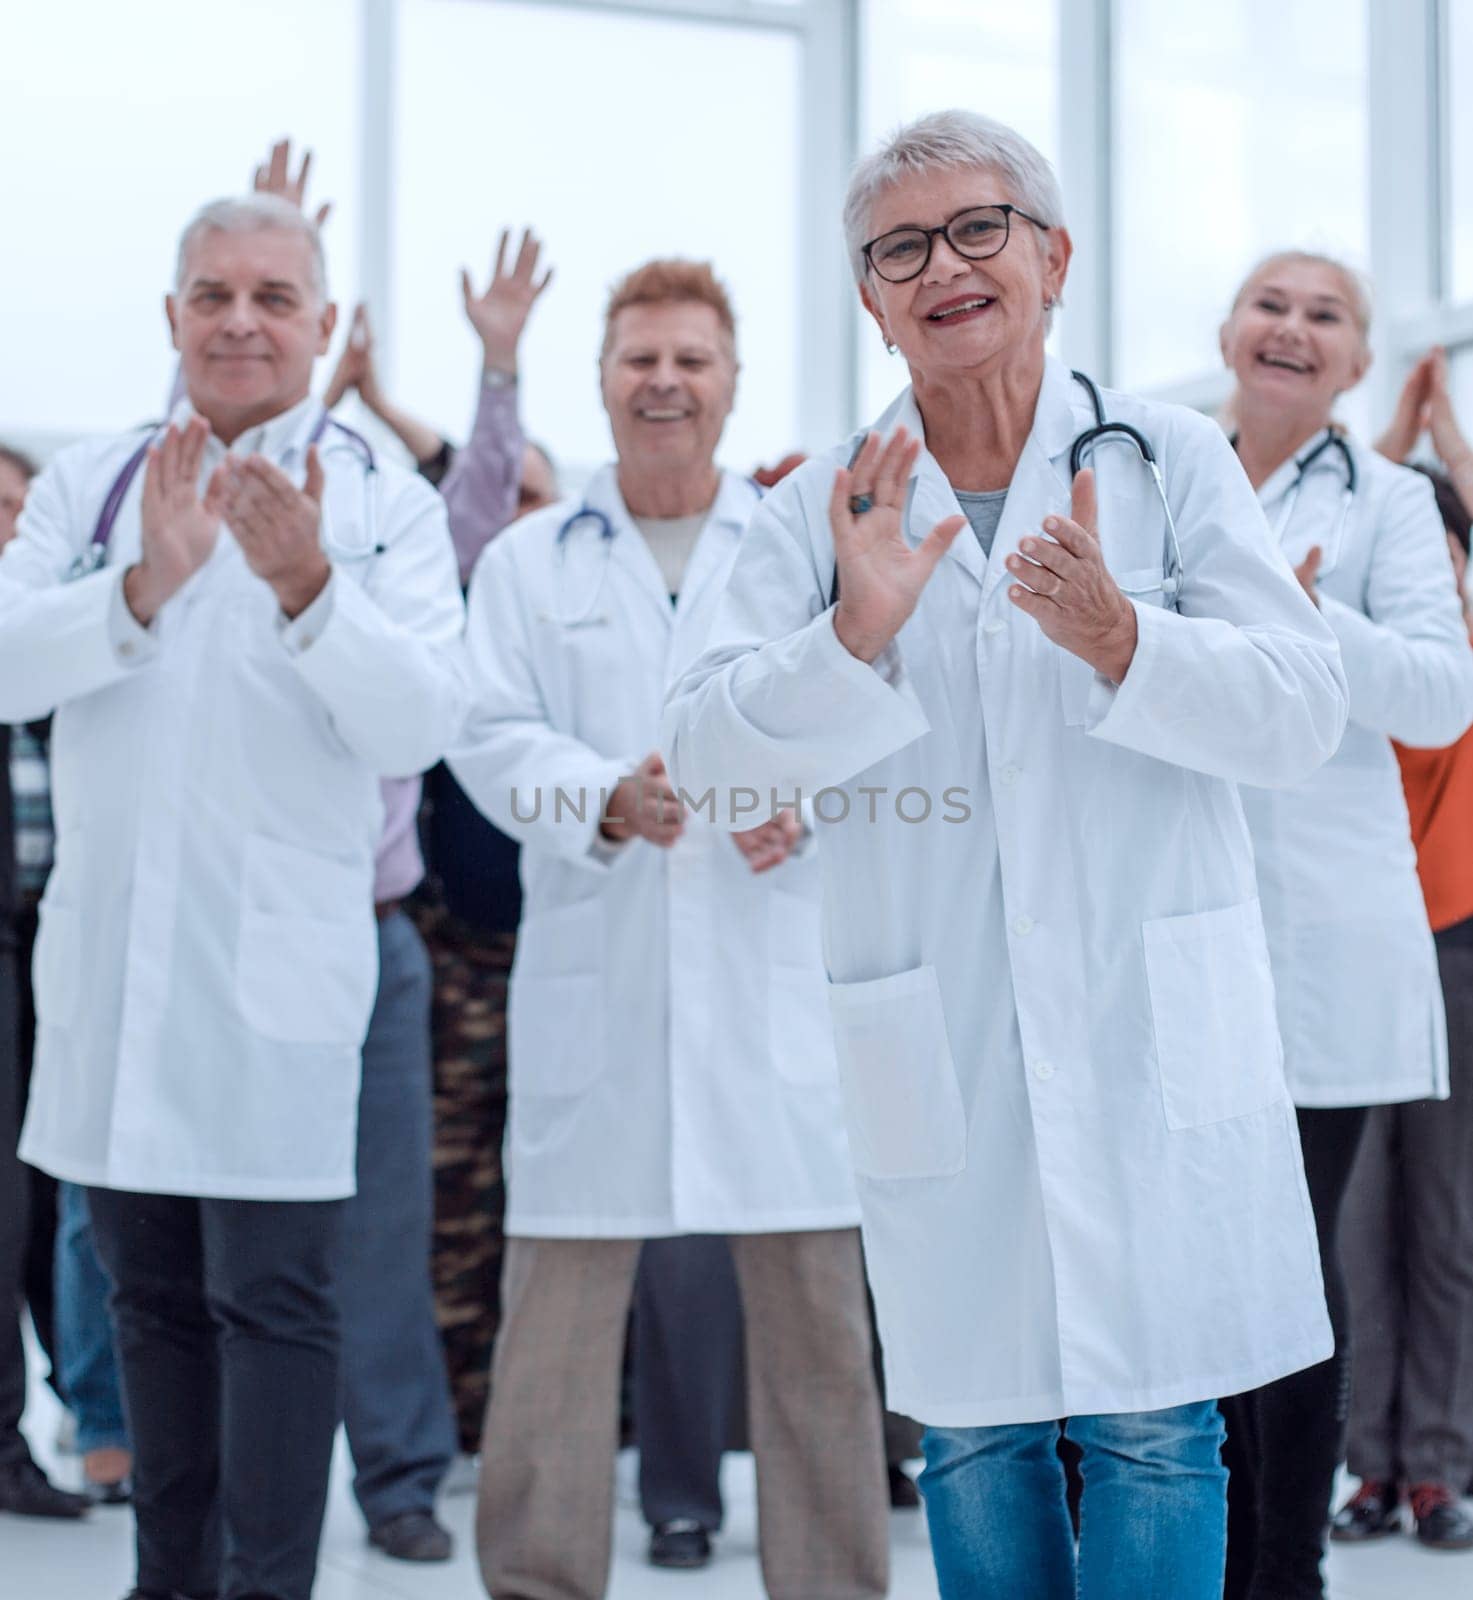 doctors and patients clap their hands.